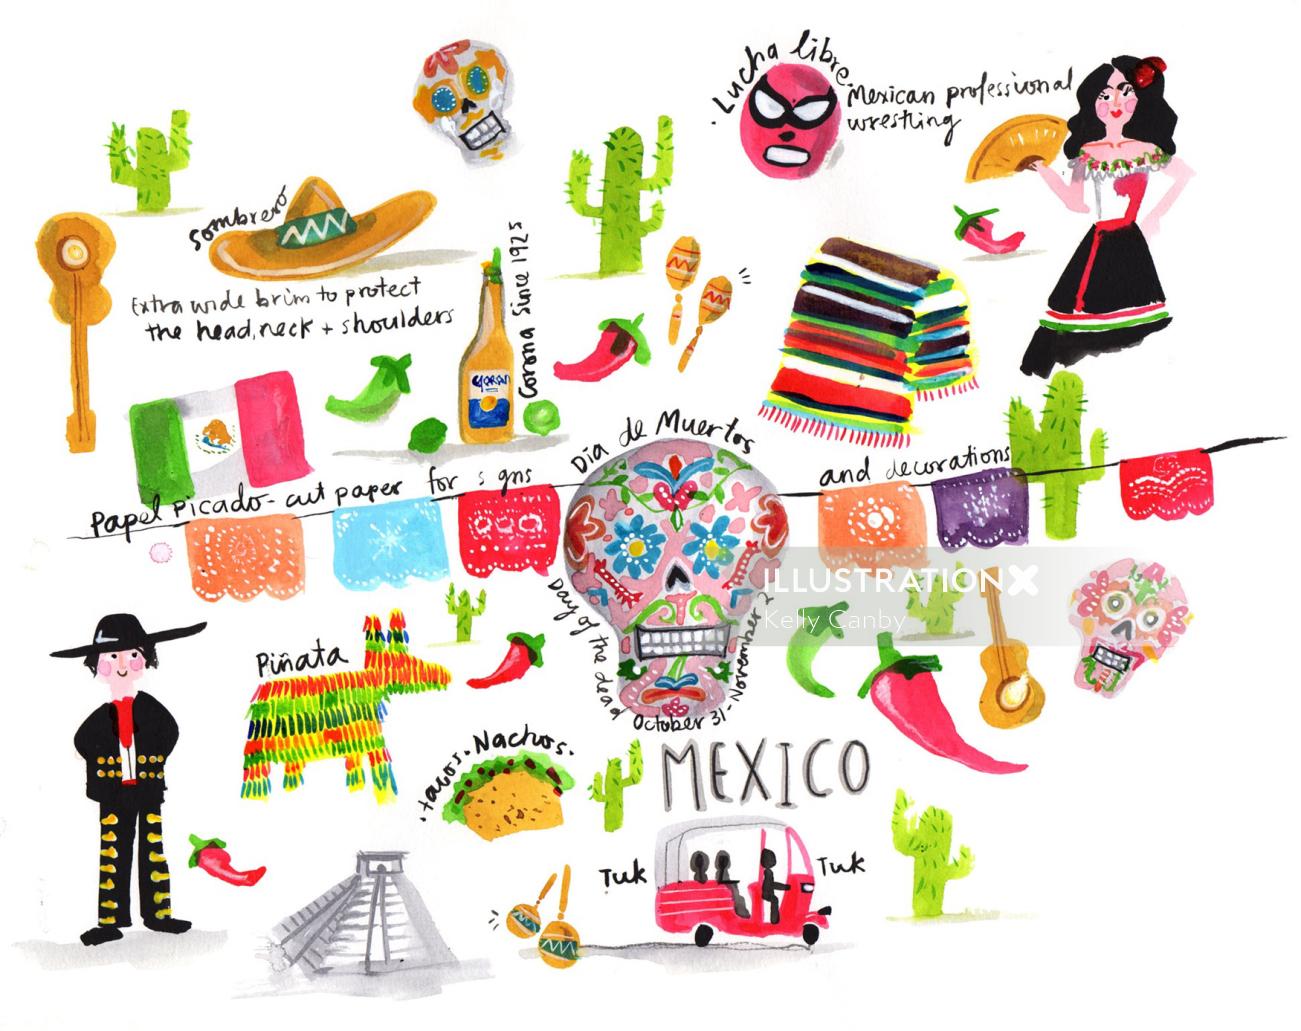 Mexico city expained on paper artwork